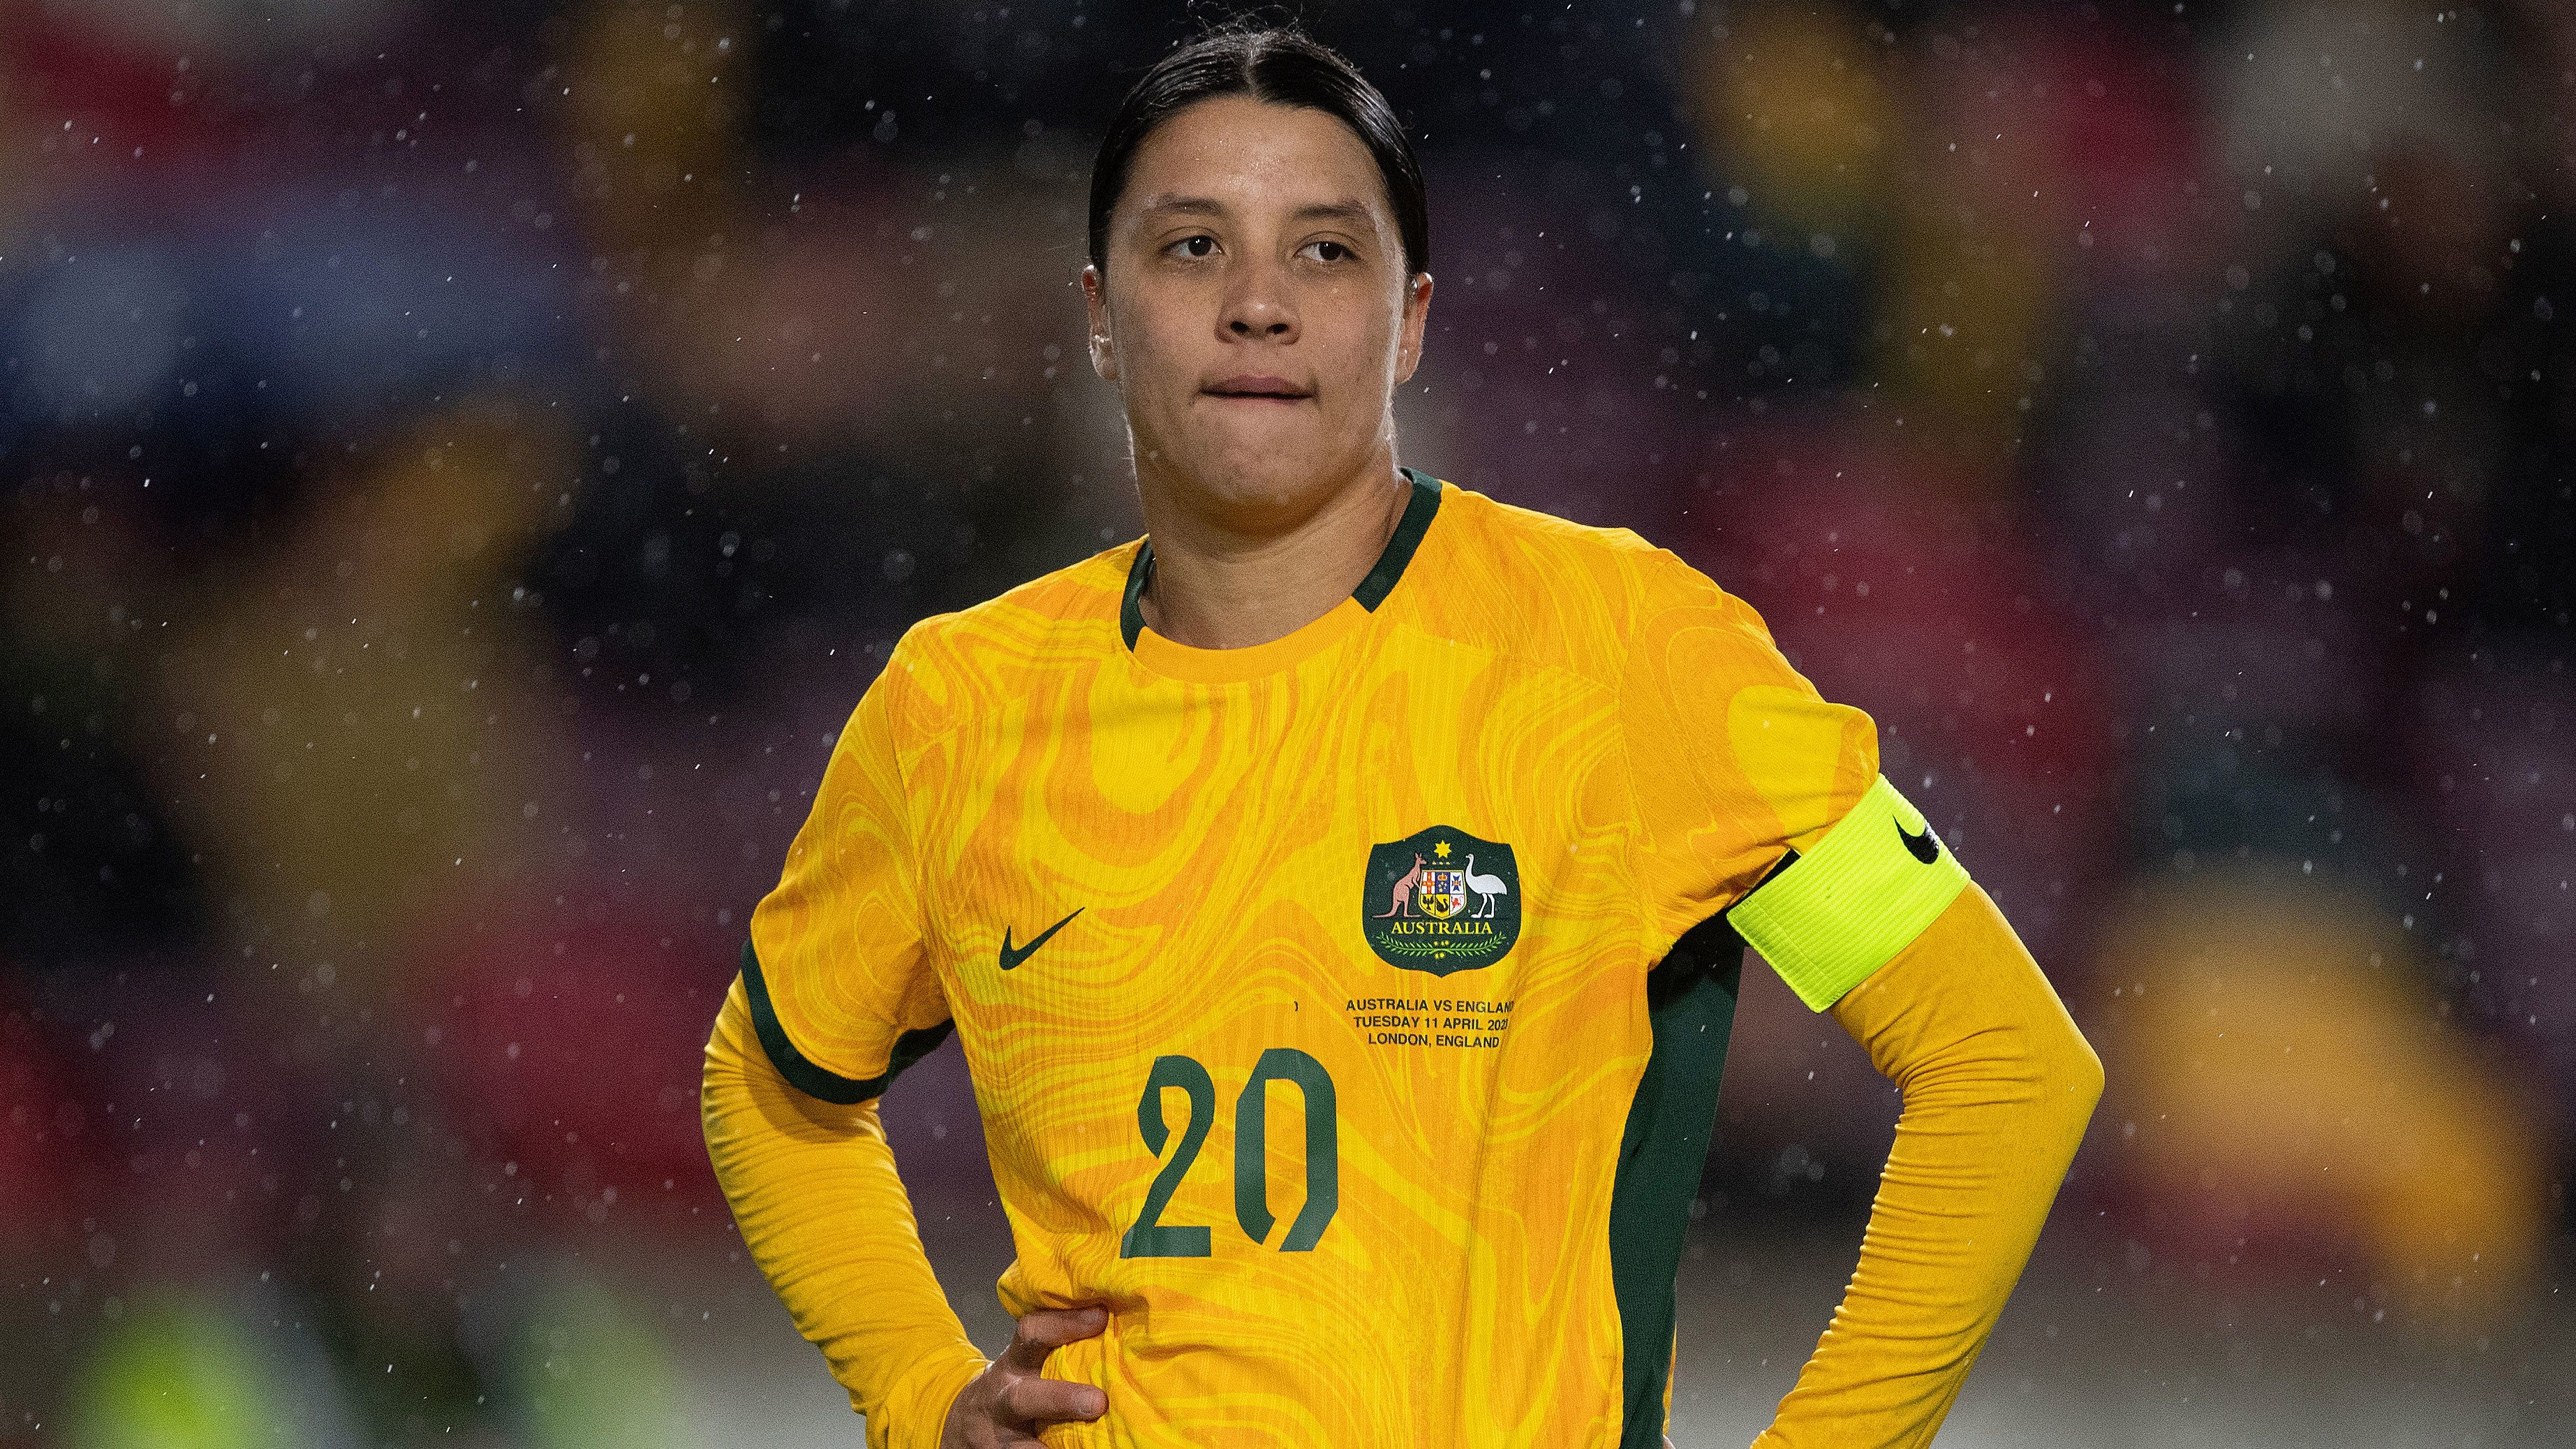 Matildas captain Sam Kerr pictured during the friendly international against England at Gtech Community Stadium on April 11, 2023 in Brentford, England.